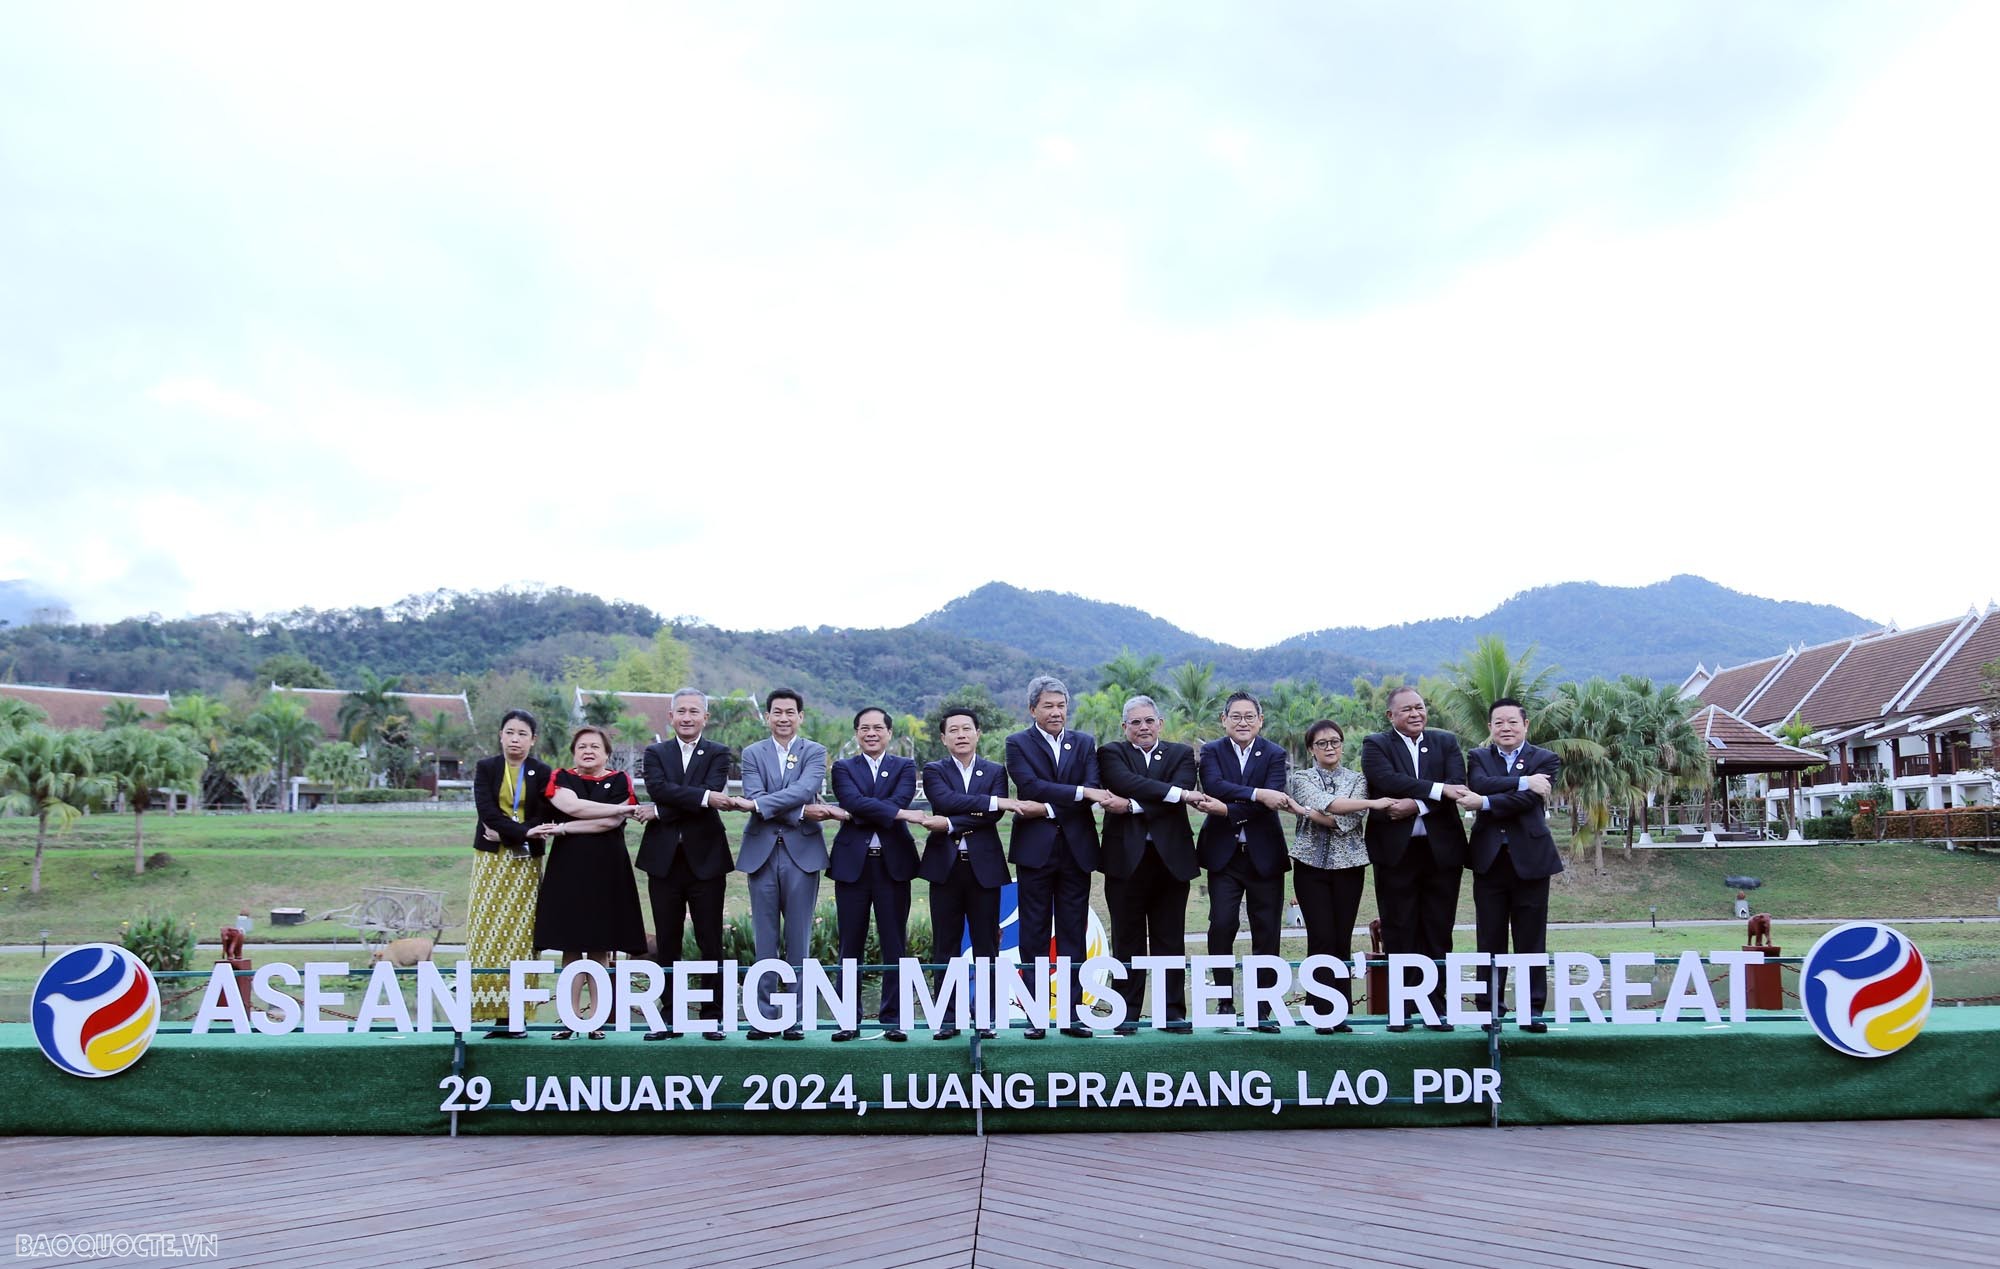 Vietnam proposes ASEAN strengthen connectivity: Foreign Minister at AMM Retreat